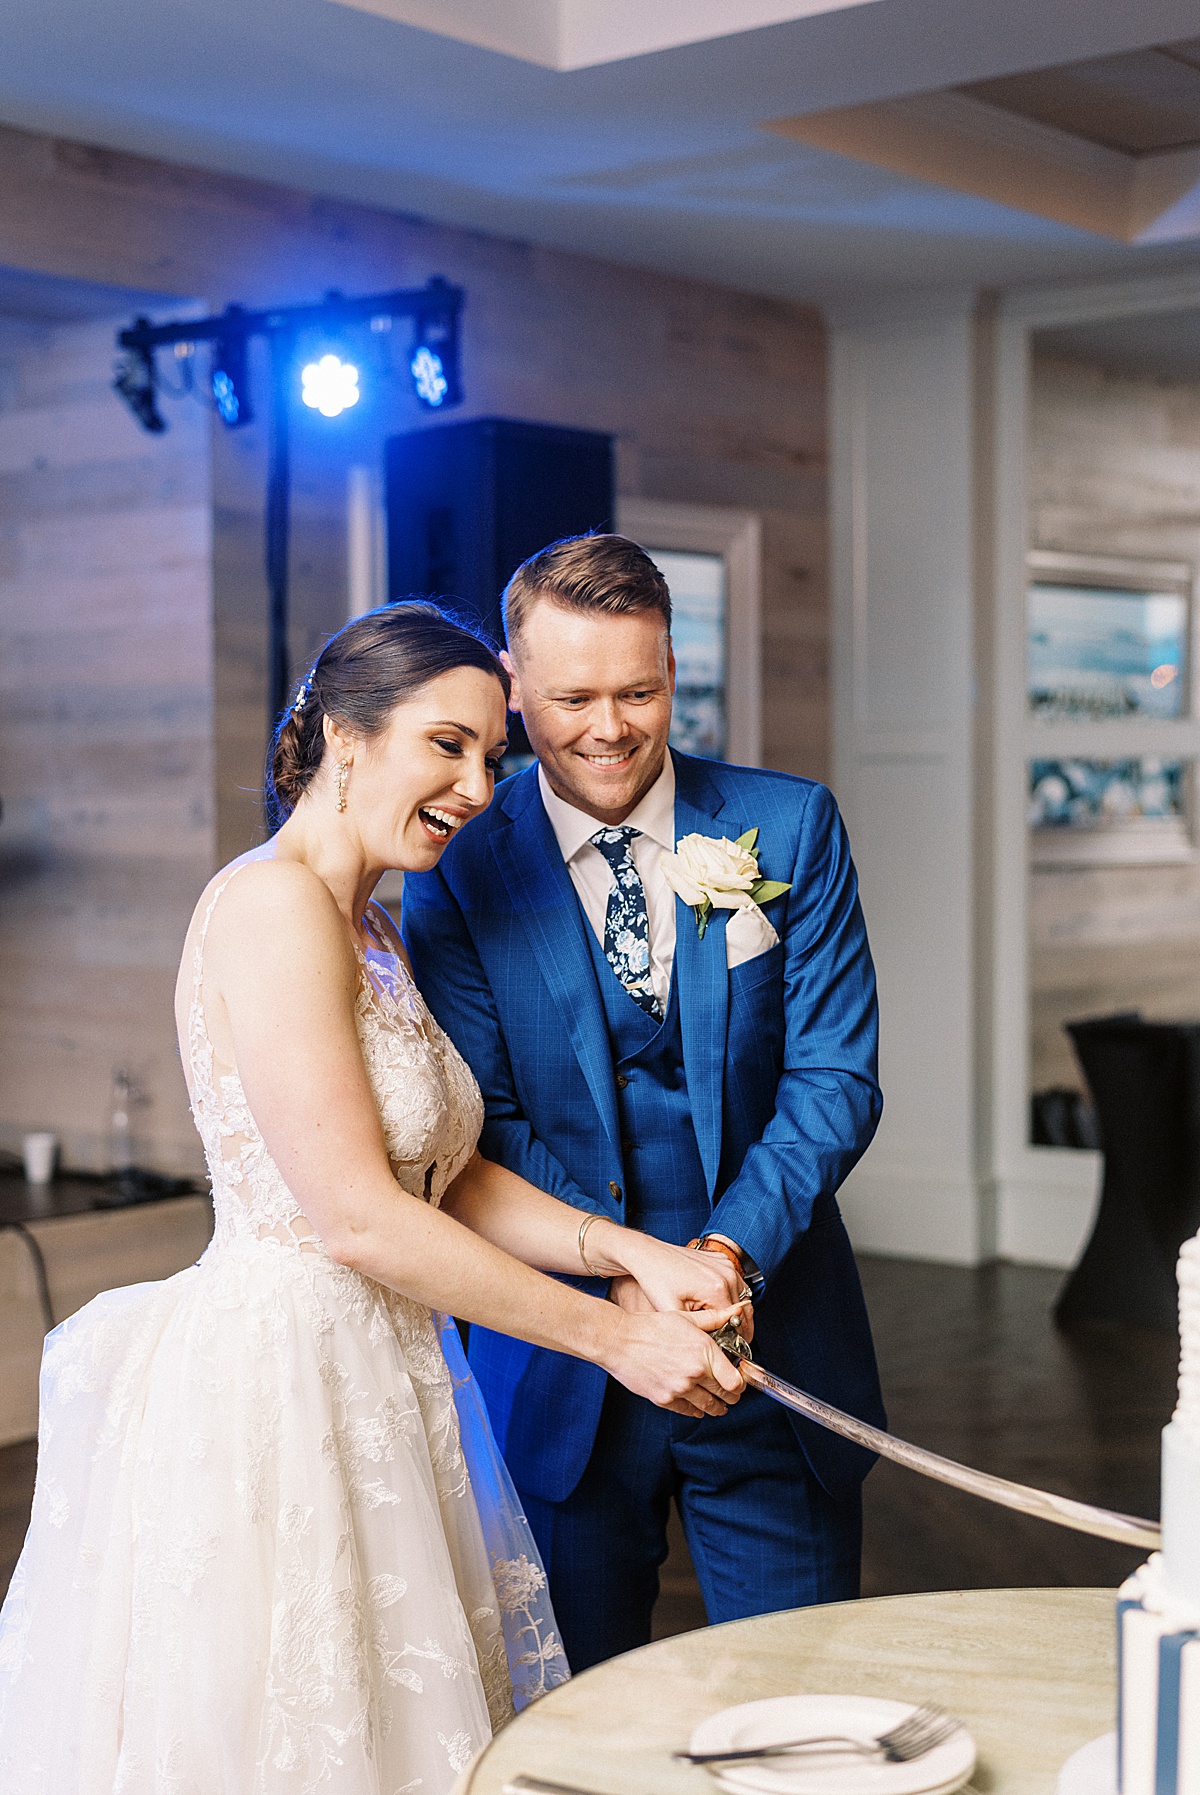 bride in lace gown and broom in blue suit cut cake with a sword after ceremony shot by Massachusetts wedding photographer